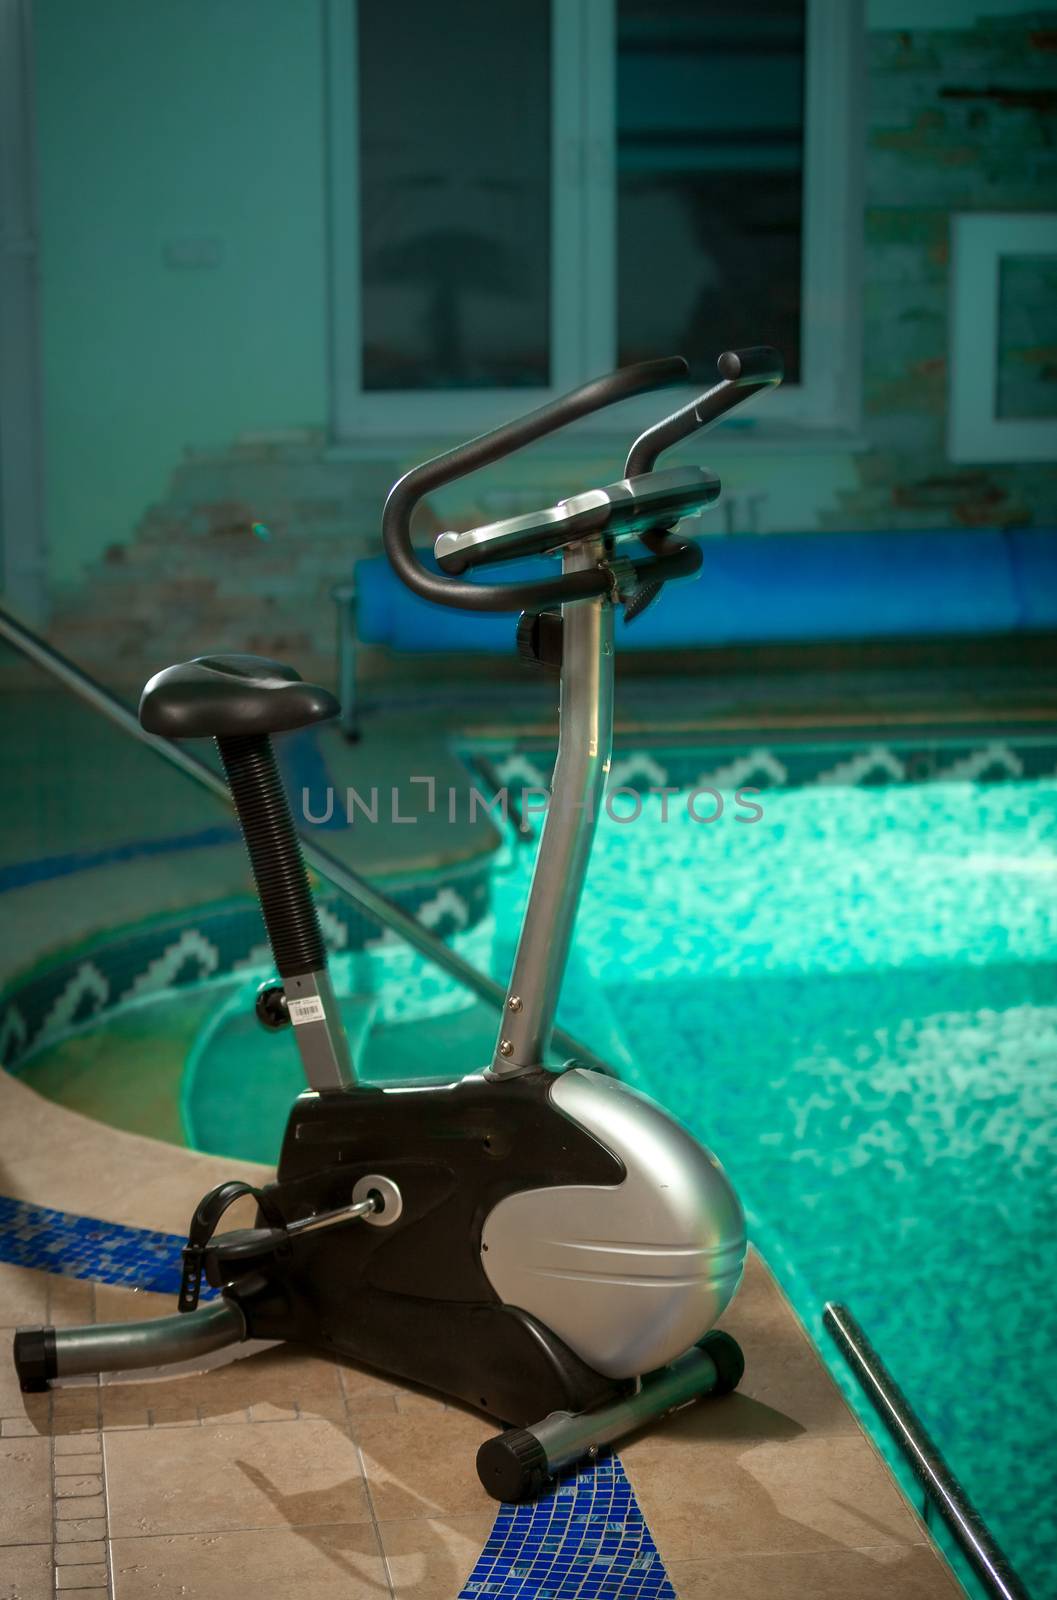 Exercise bike at swimming pool by Kryzhov